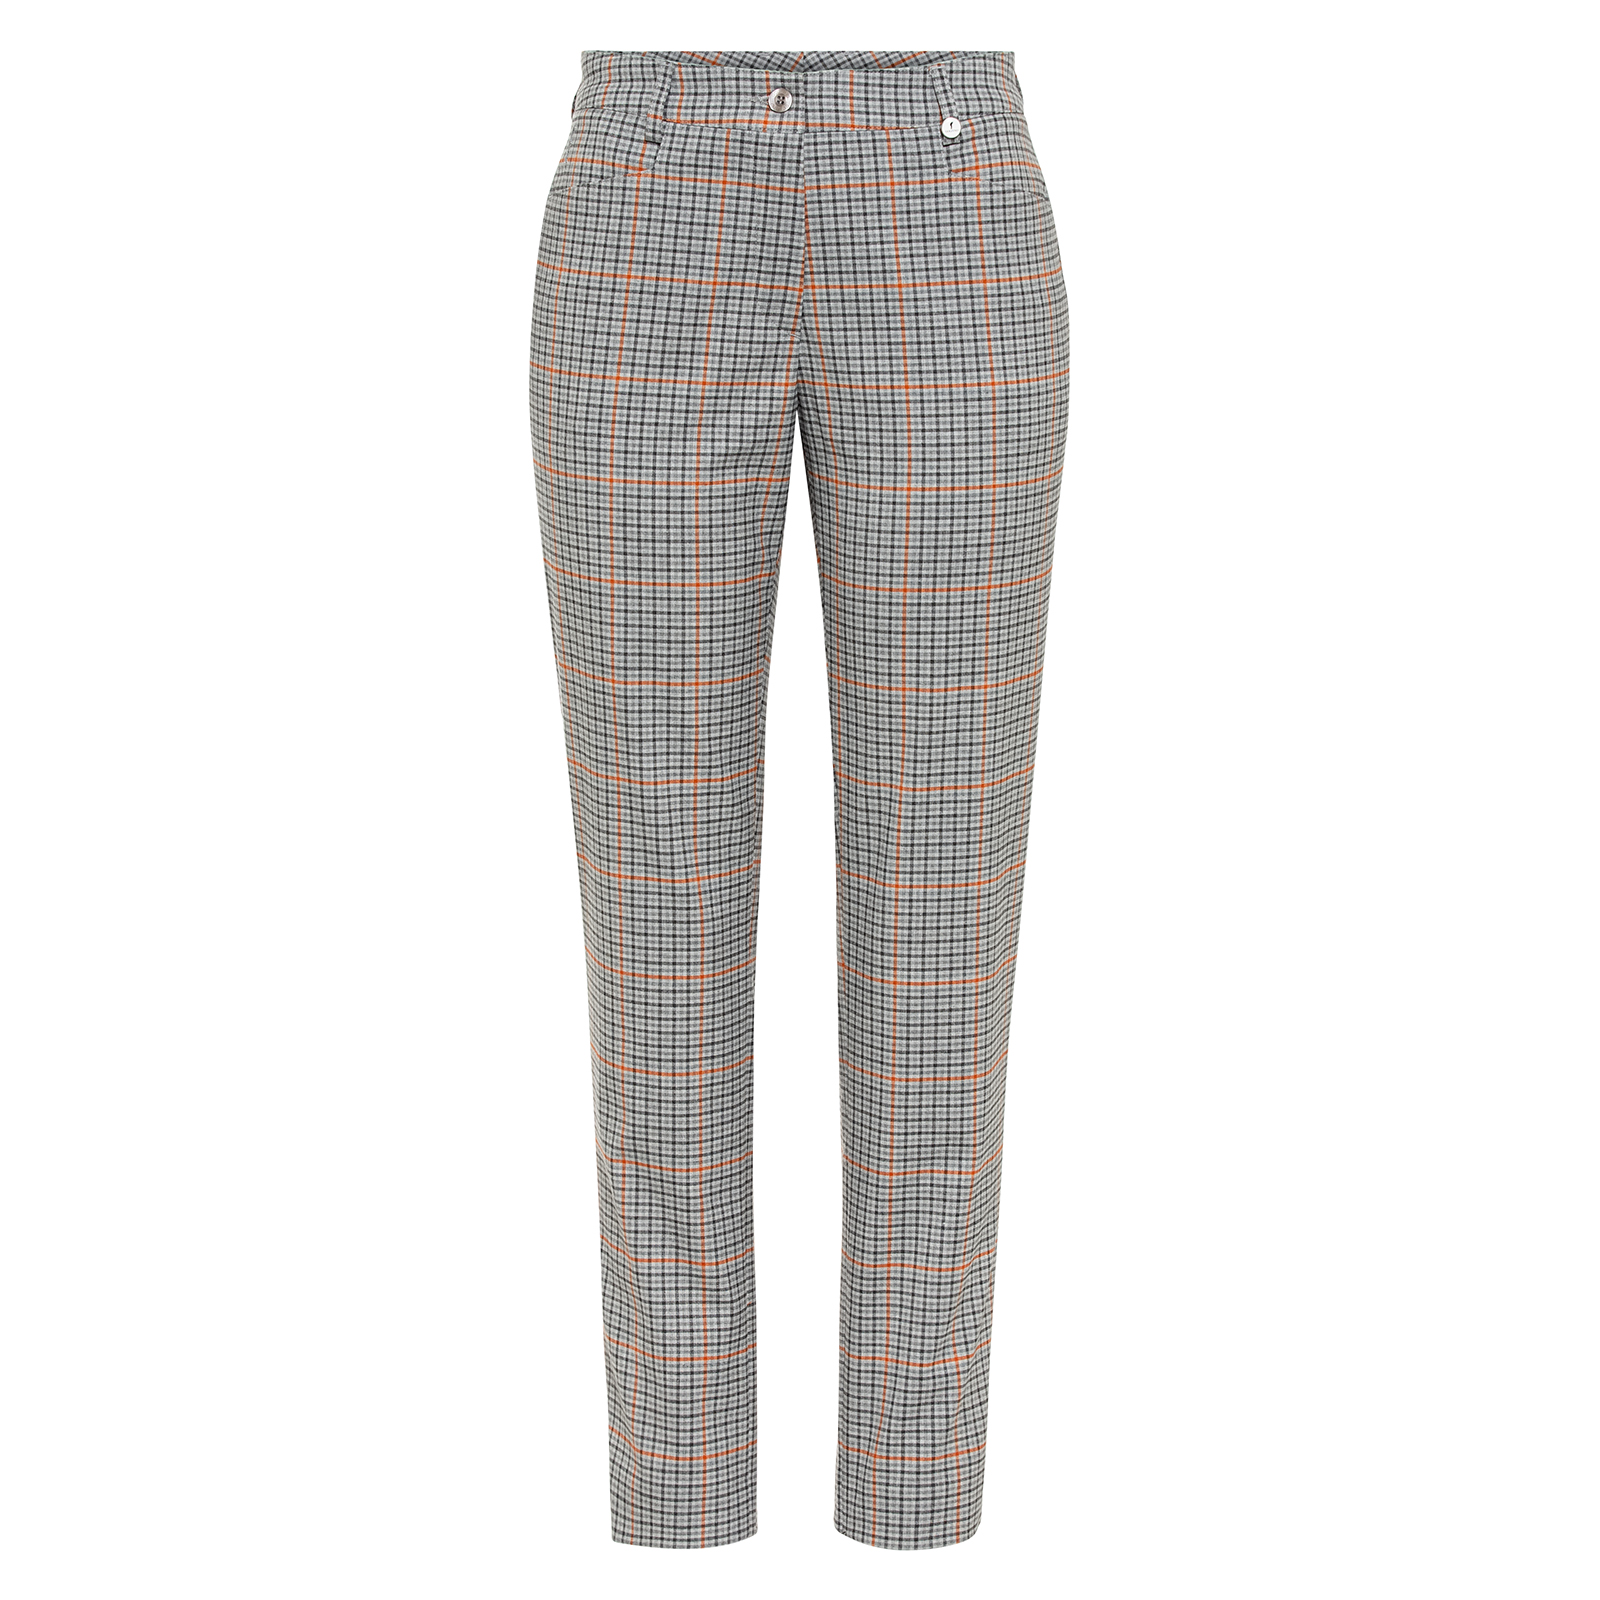 Ladies' 7/8 checked golf trousers in stretch fabric with viscose